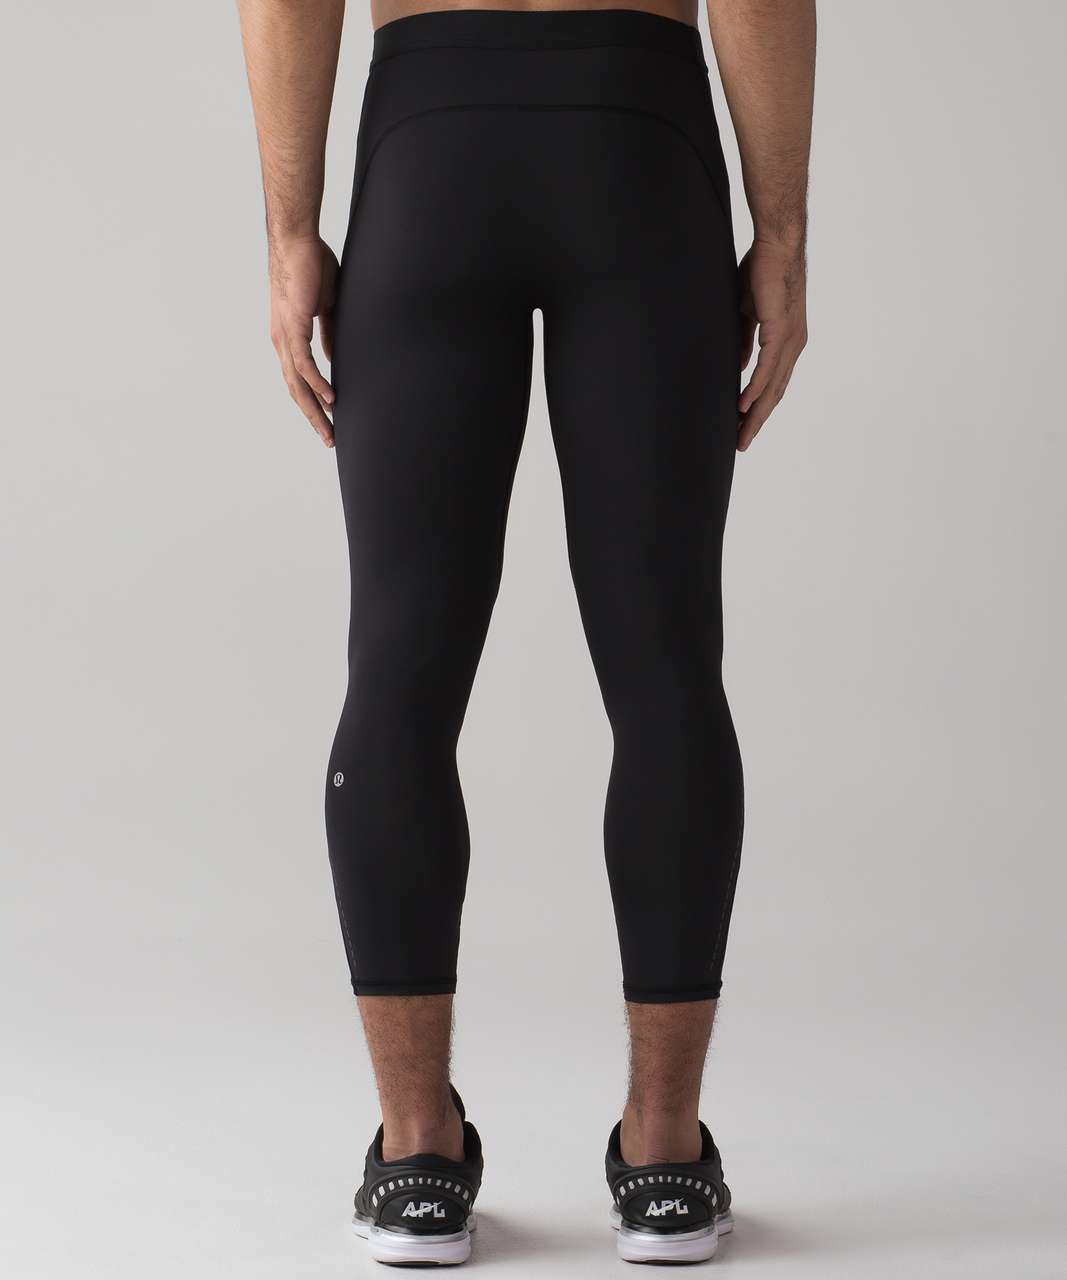 Opaque Tight Leggings For Running T2434-4